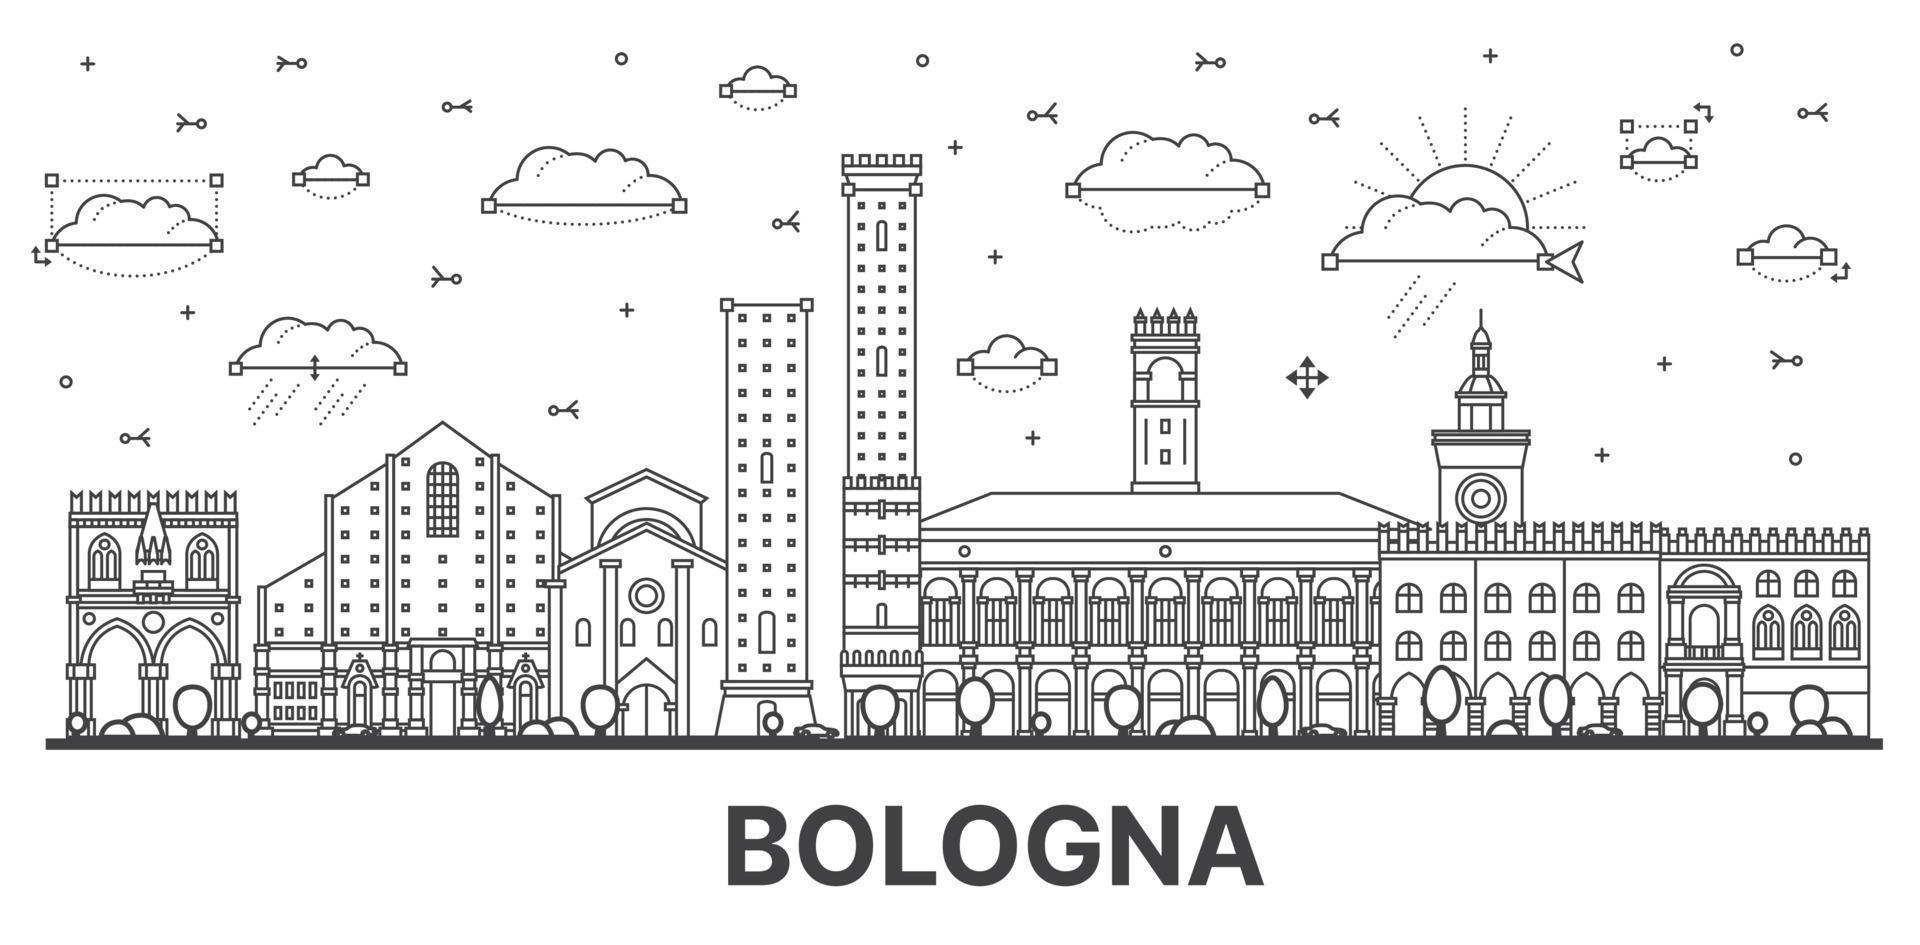 Outline Bologna Italy City Skyline with Historic Buildings Isolated on White. vector